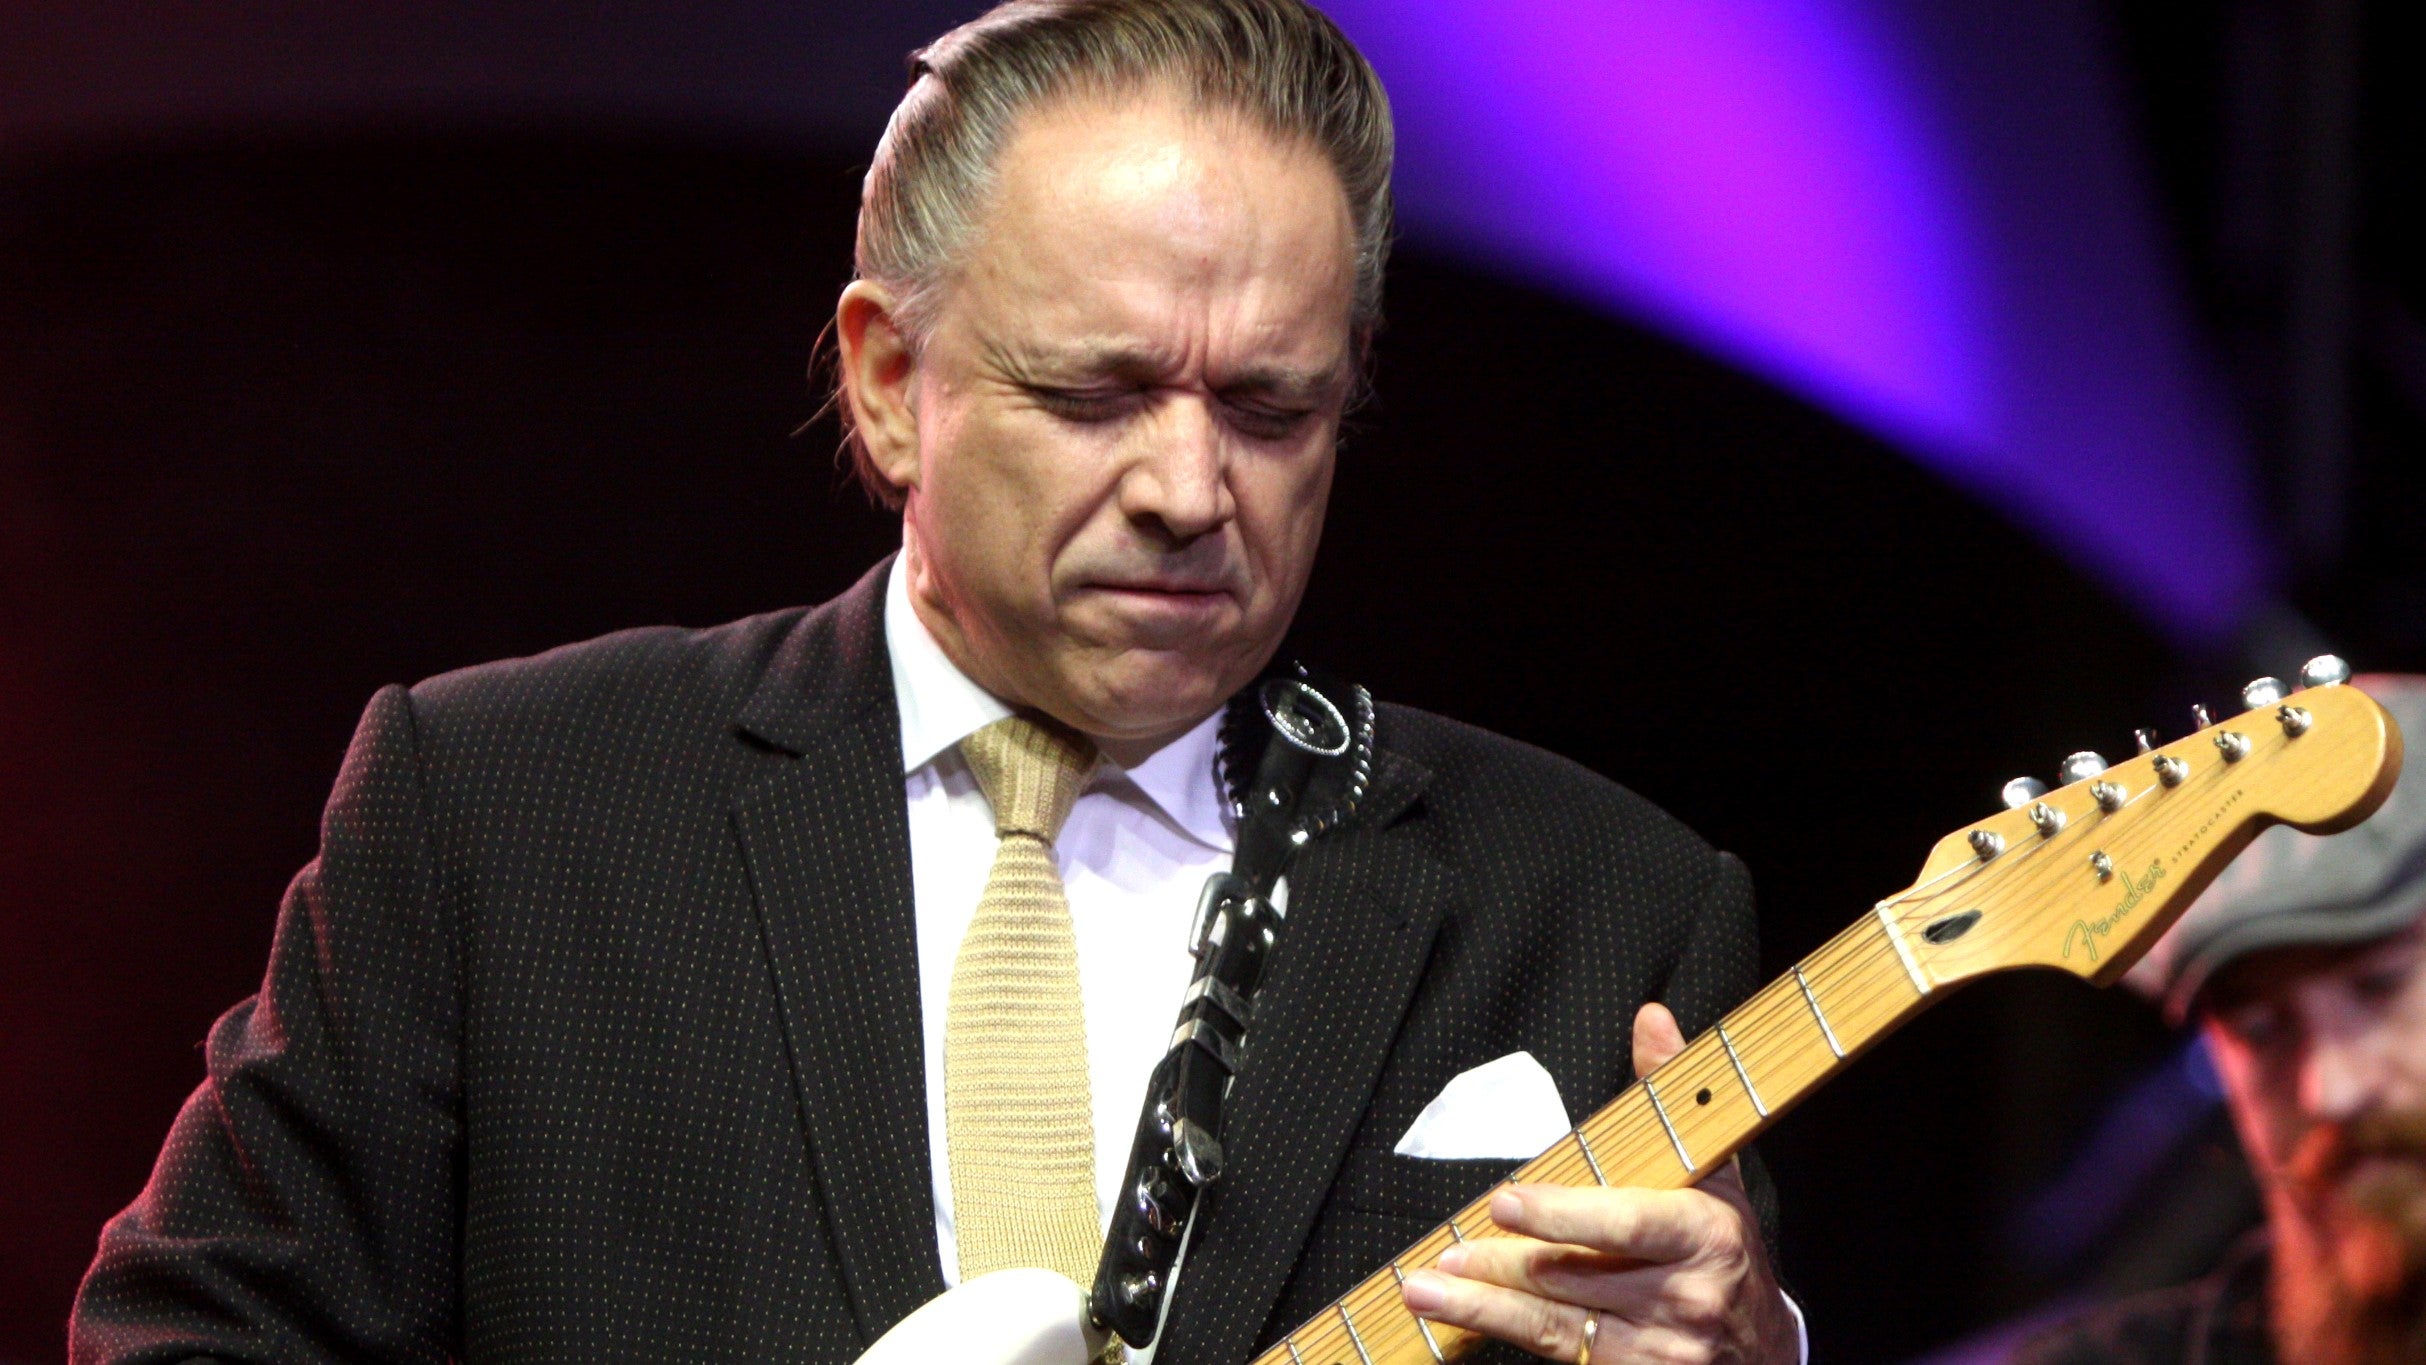 Jimmie Vaughan at Golden State Theatre